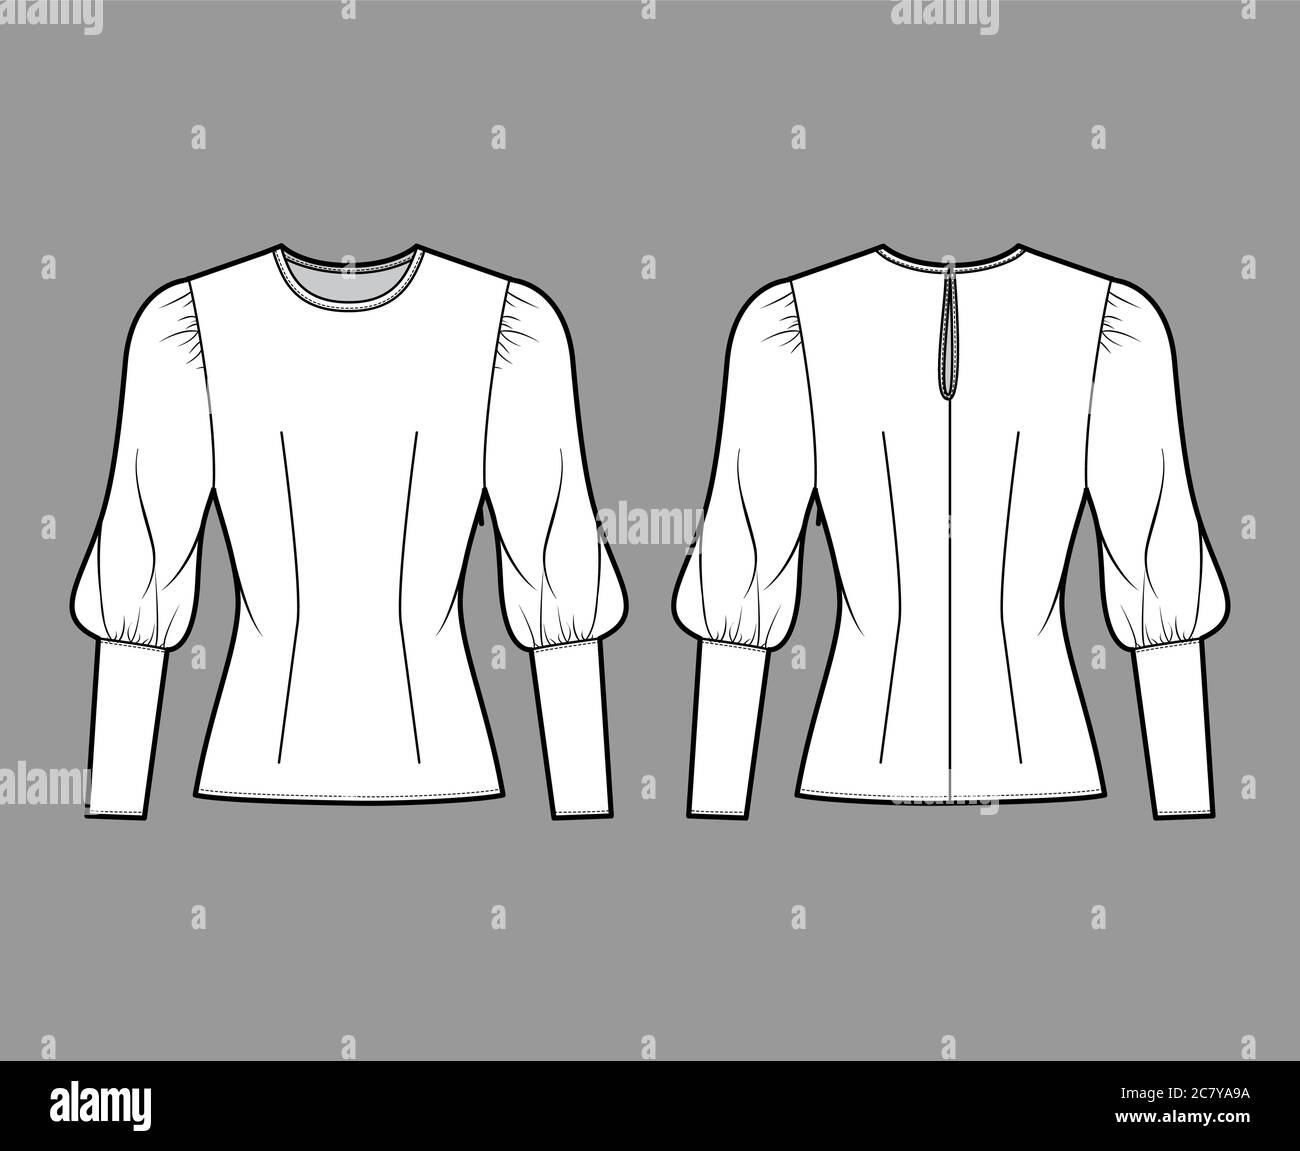 Blouse technical fashion illustration with round neckline, puffy mutton sleeves, fitted body, side zip fastening. Flat apparel template front white color. Women, men unisex CAD garment designer mockup Stock Vector